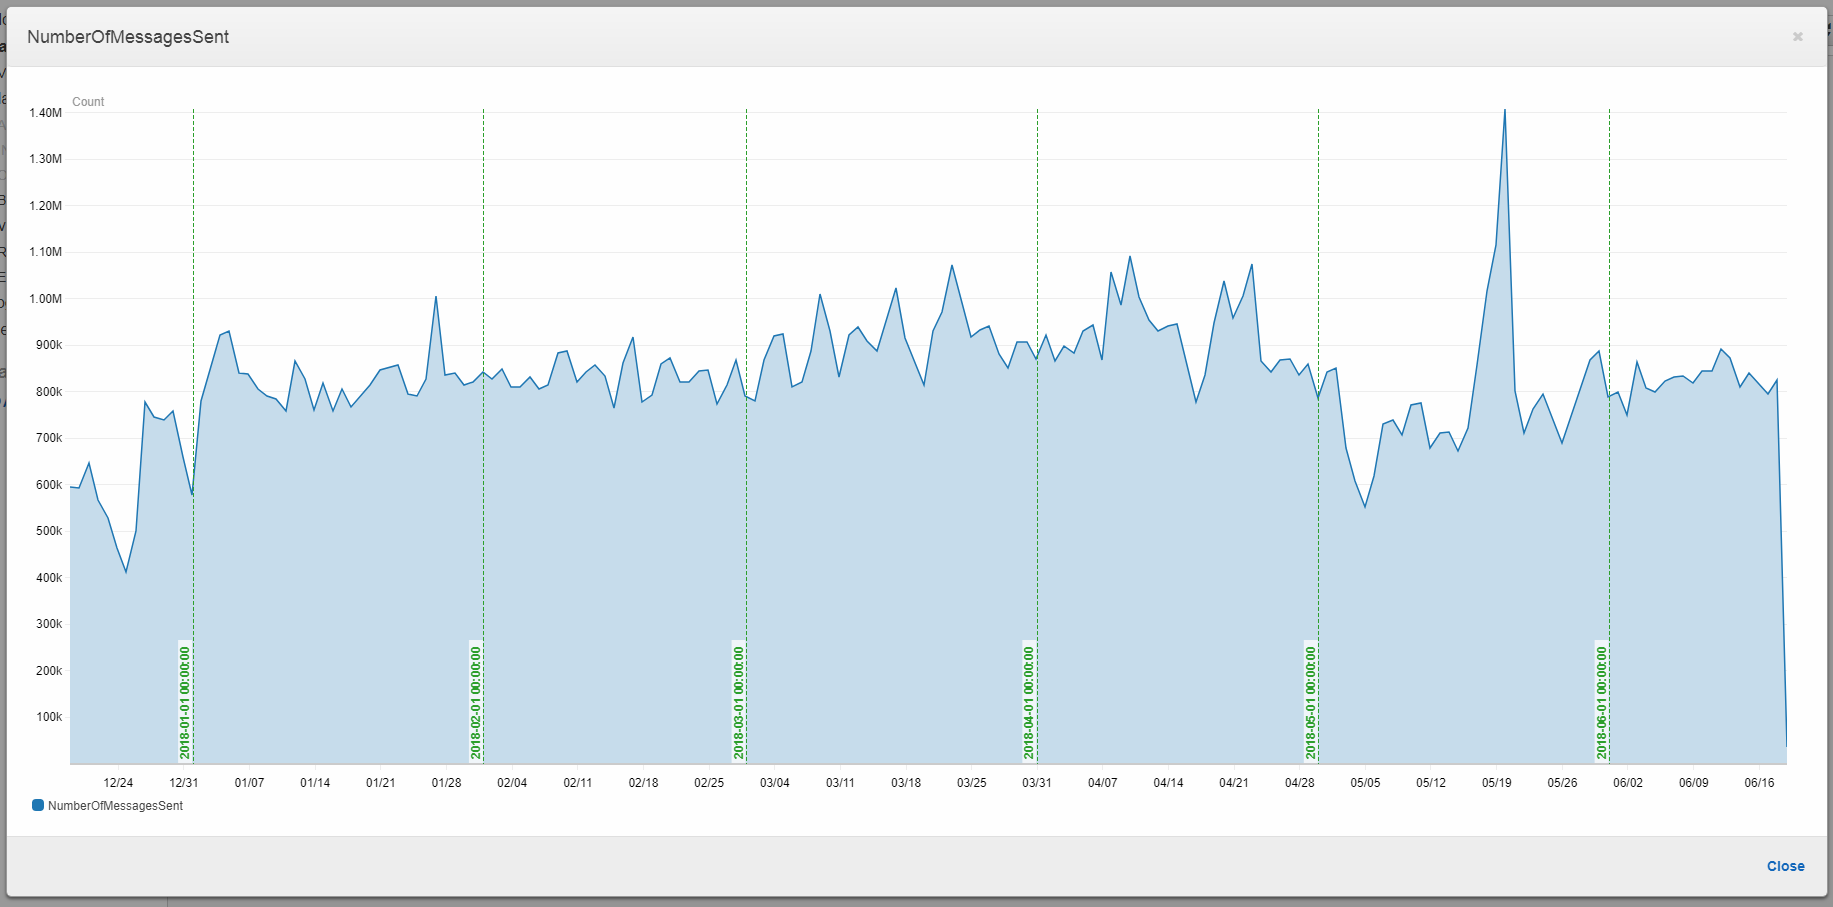 CloudWatch metrics showing how busy the image processing is